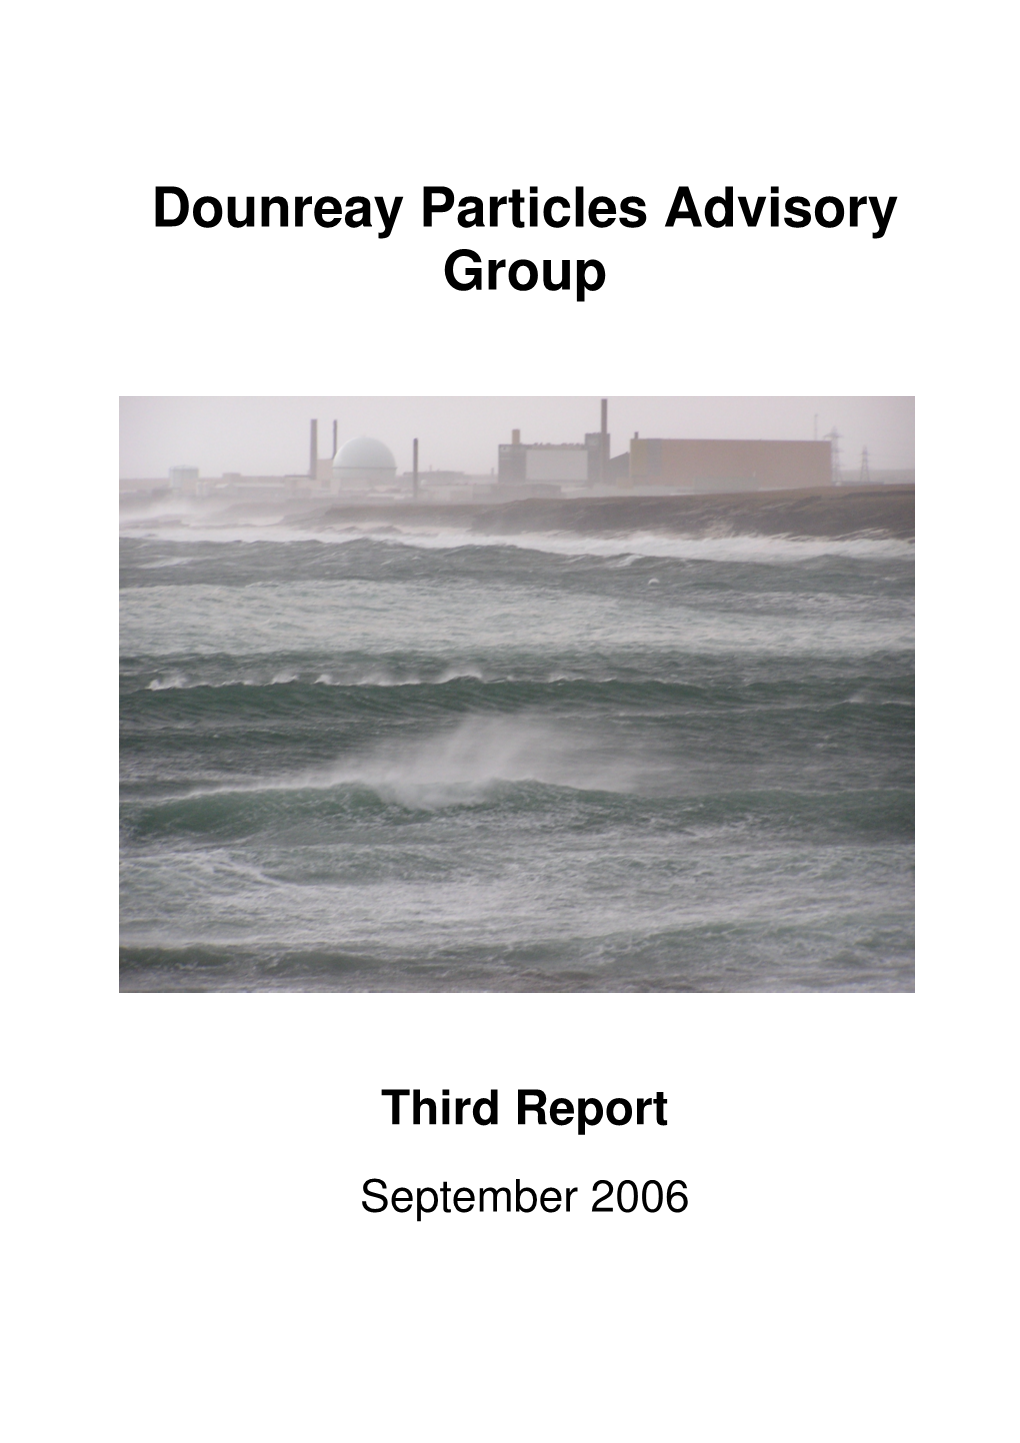 Dounreay Particles Advisory Group